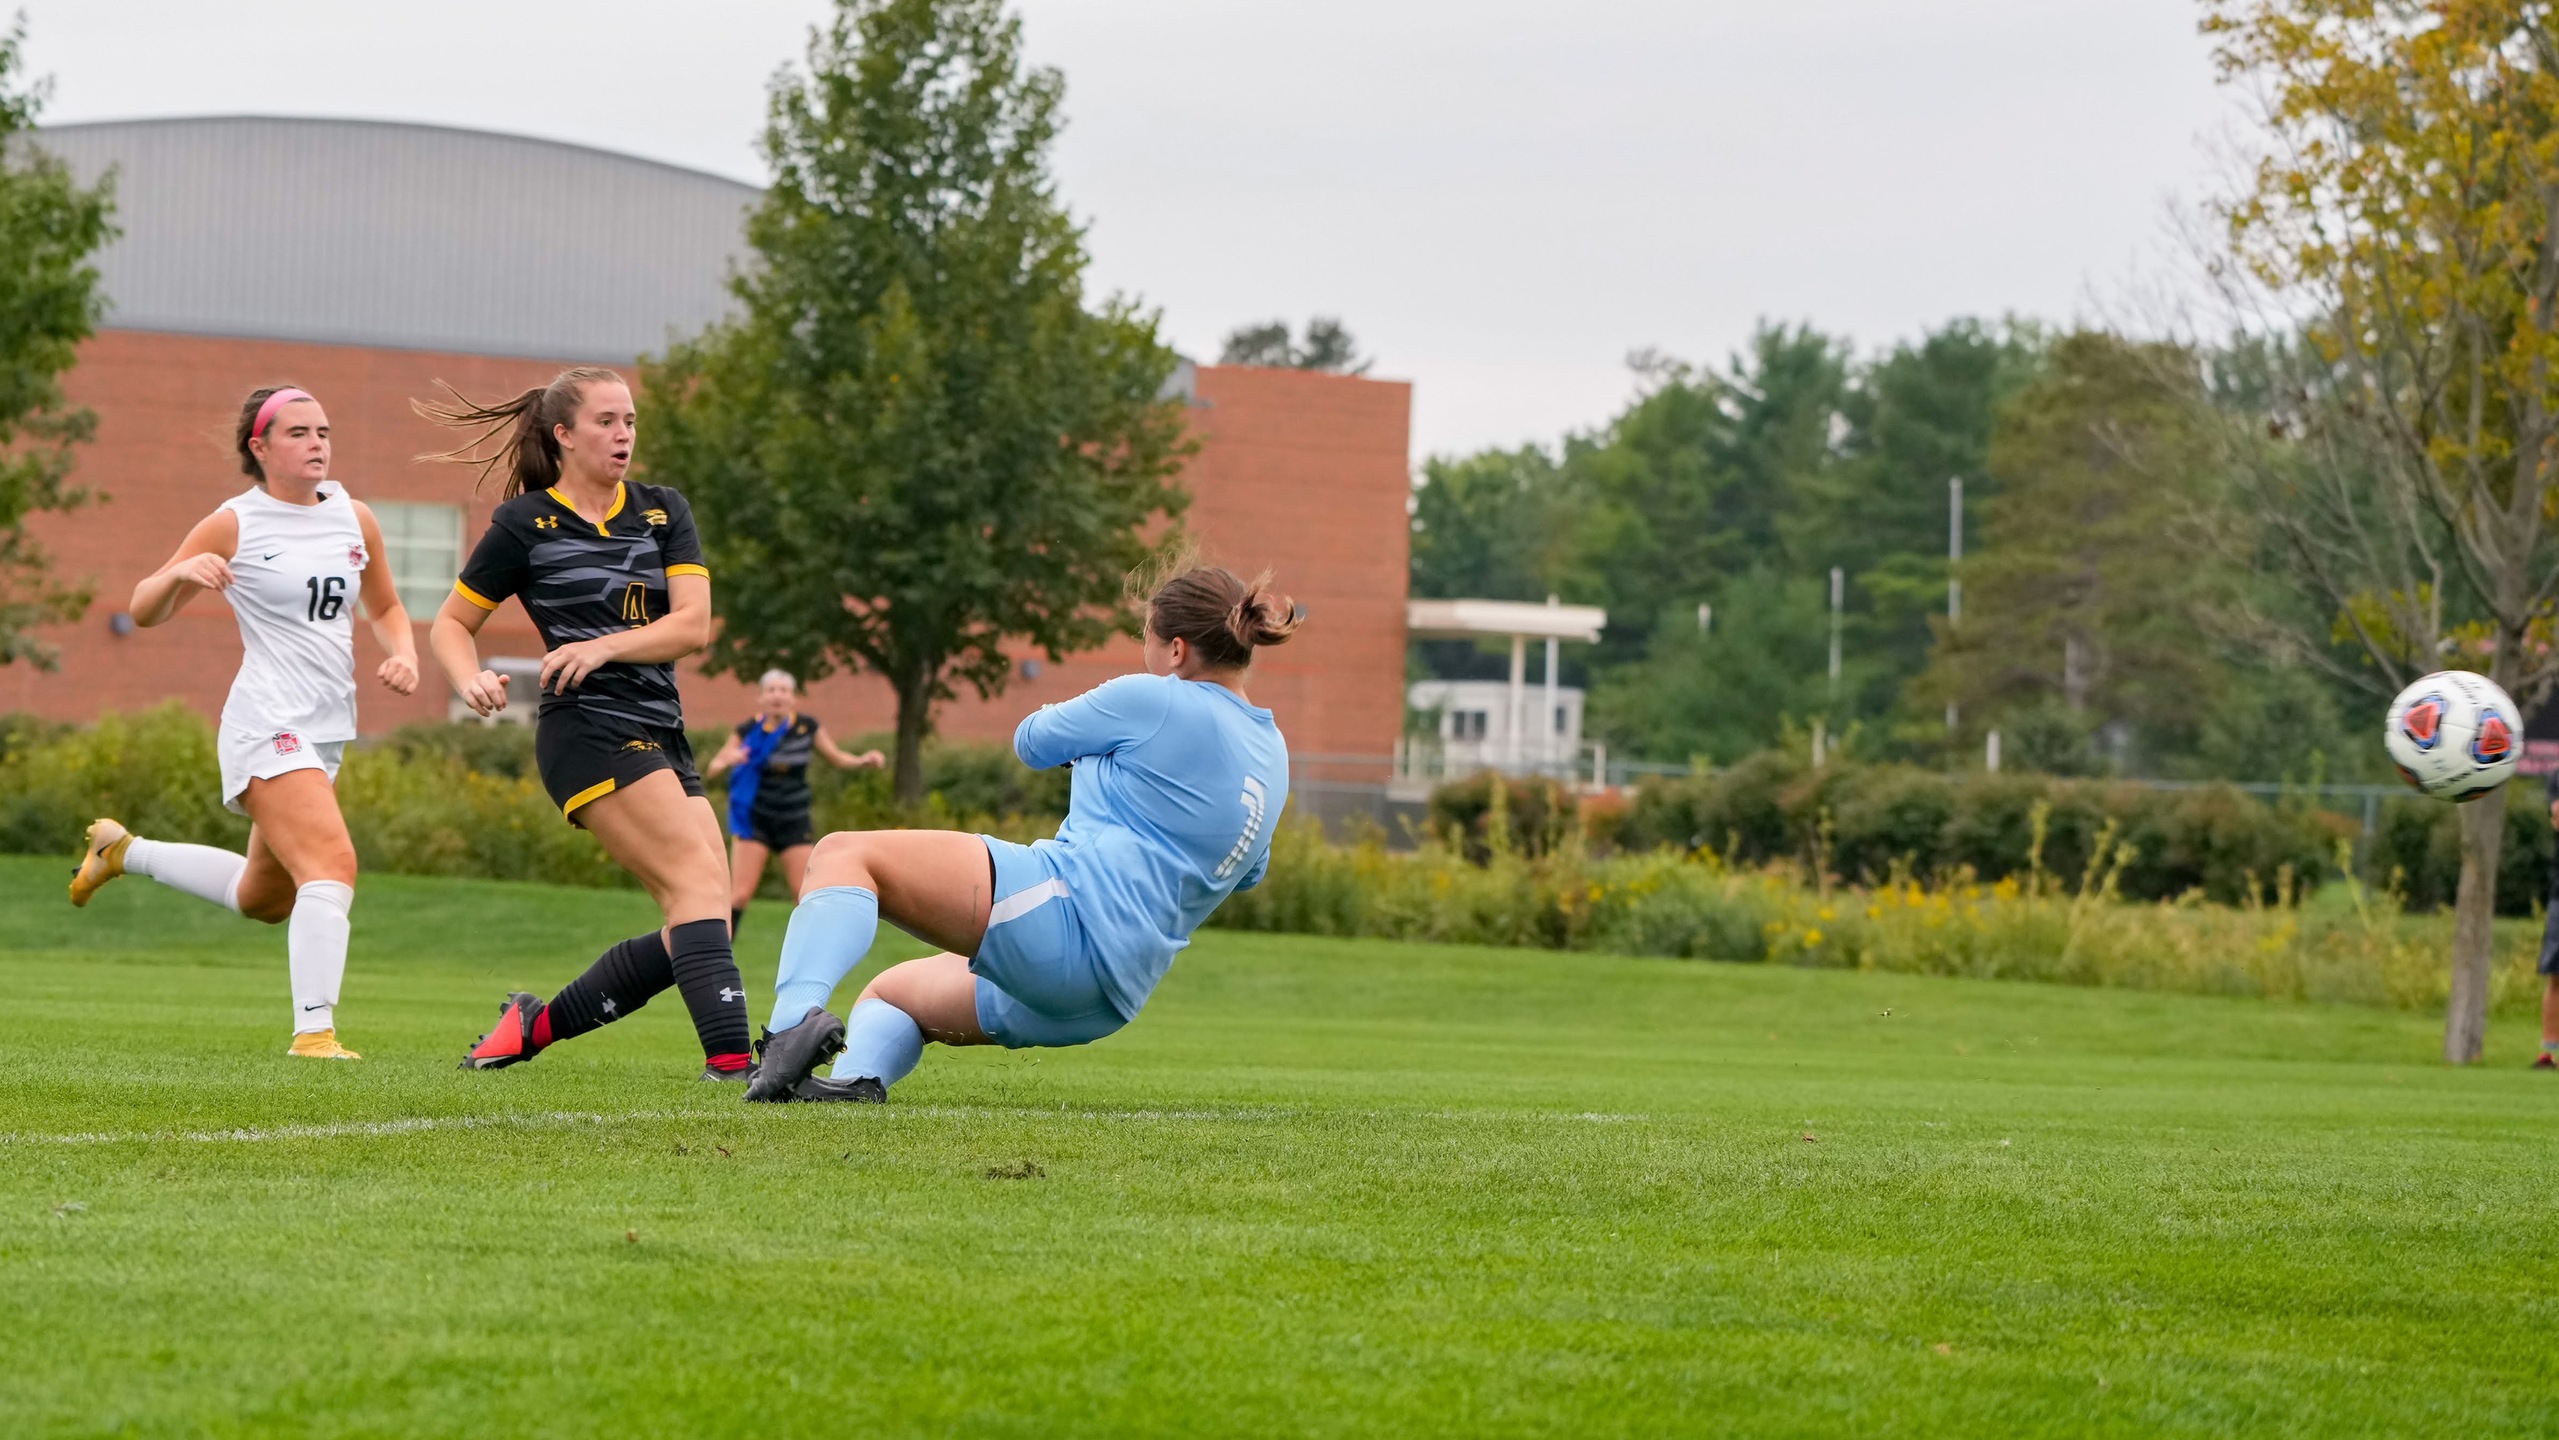 Riley Kaufmann scored her match-winning goal against the Pioneers on this kick during the 72nd minute of play.